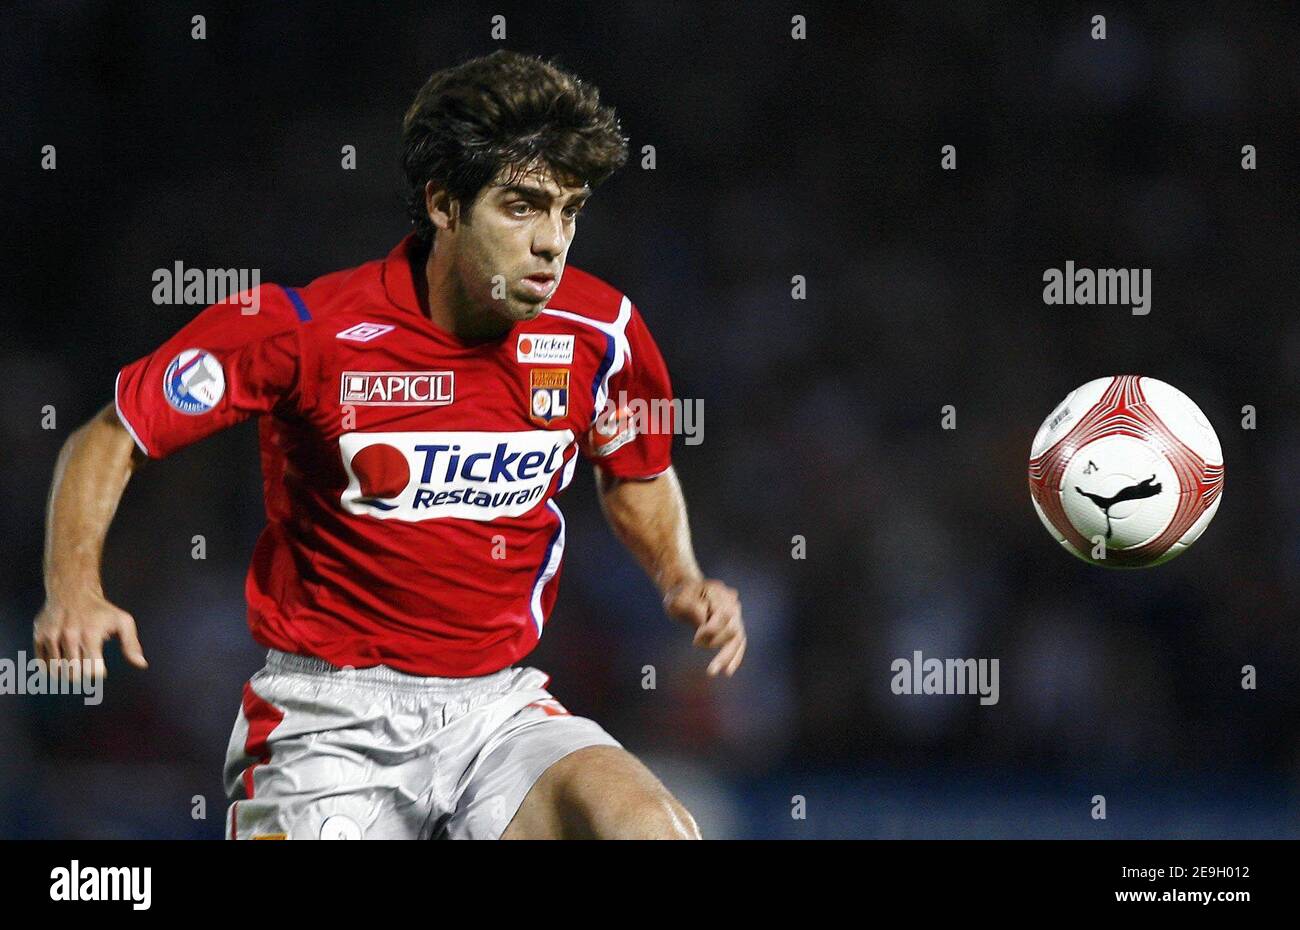 Lyon's Juninho in action during the French first league football match, Girondins de Bordeaux vs Olympique Lyonnais, at Chaban-Delmas stadium, in Bordeaux, France, on August 20, 2006. Lyon won 2-1. Photo by Christian Liewig/ABACAPRESS.COM Stock Photo